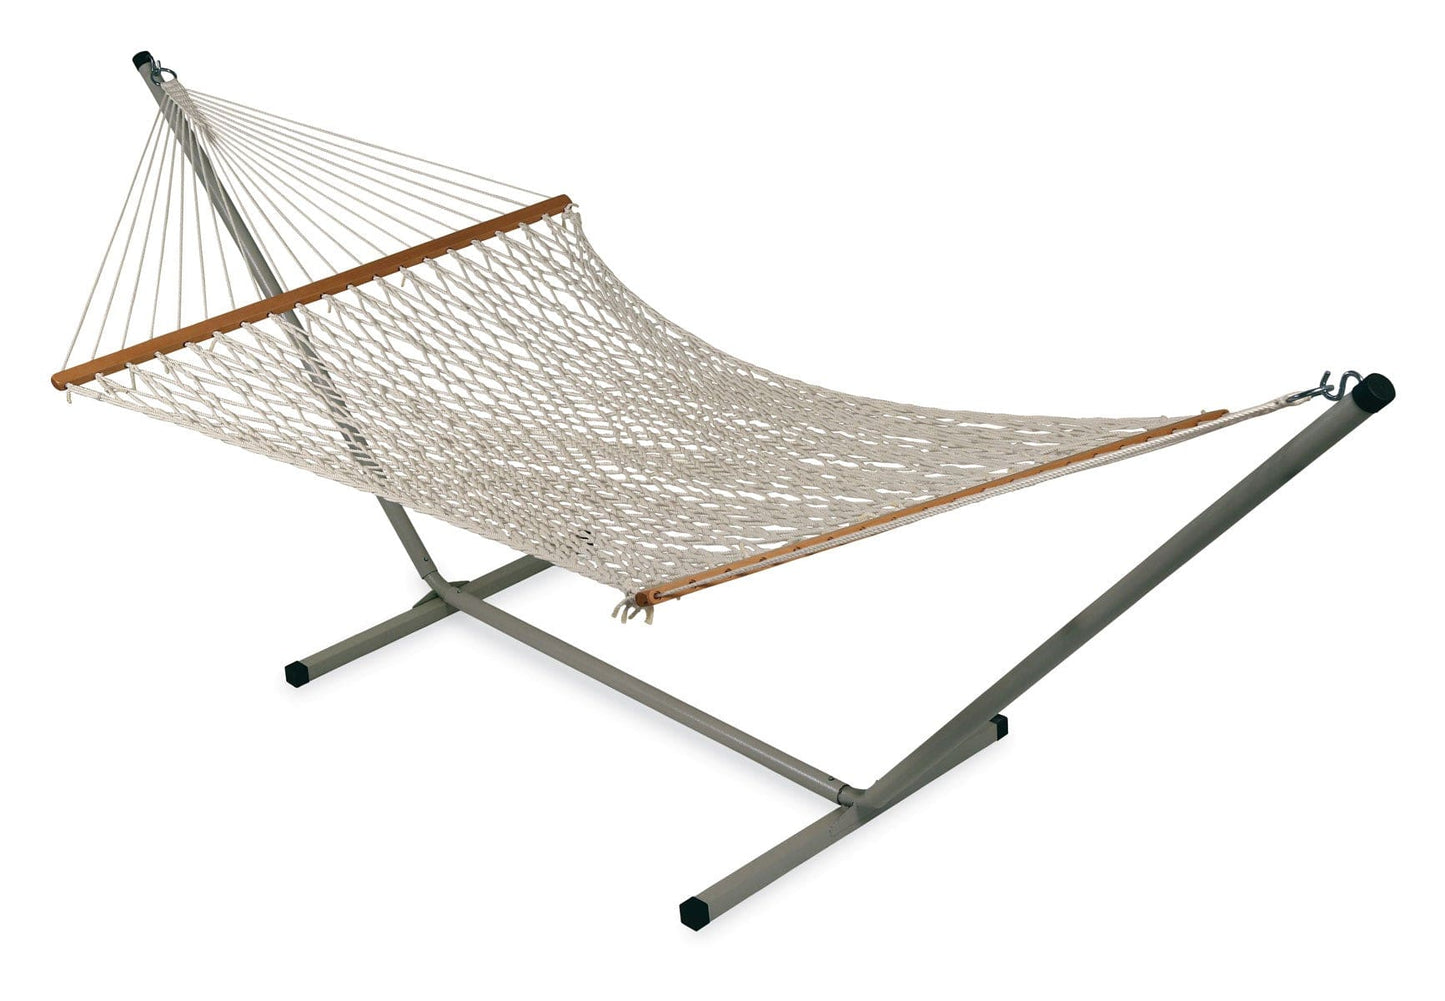 Outdoor UV Resistant Hammock Furniture With Stand Frame, Weight Capacity of 200 kg